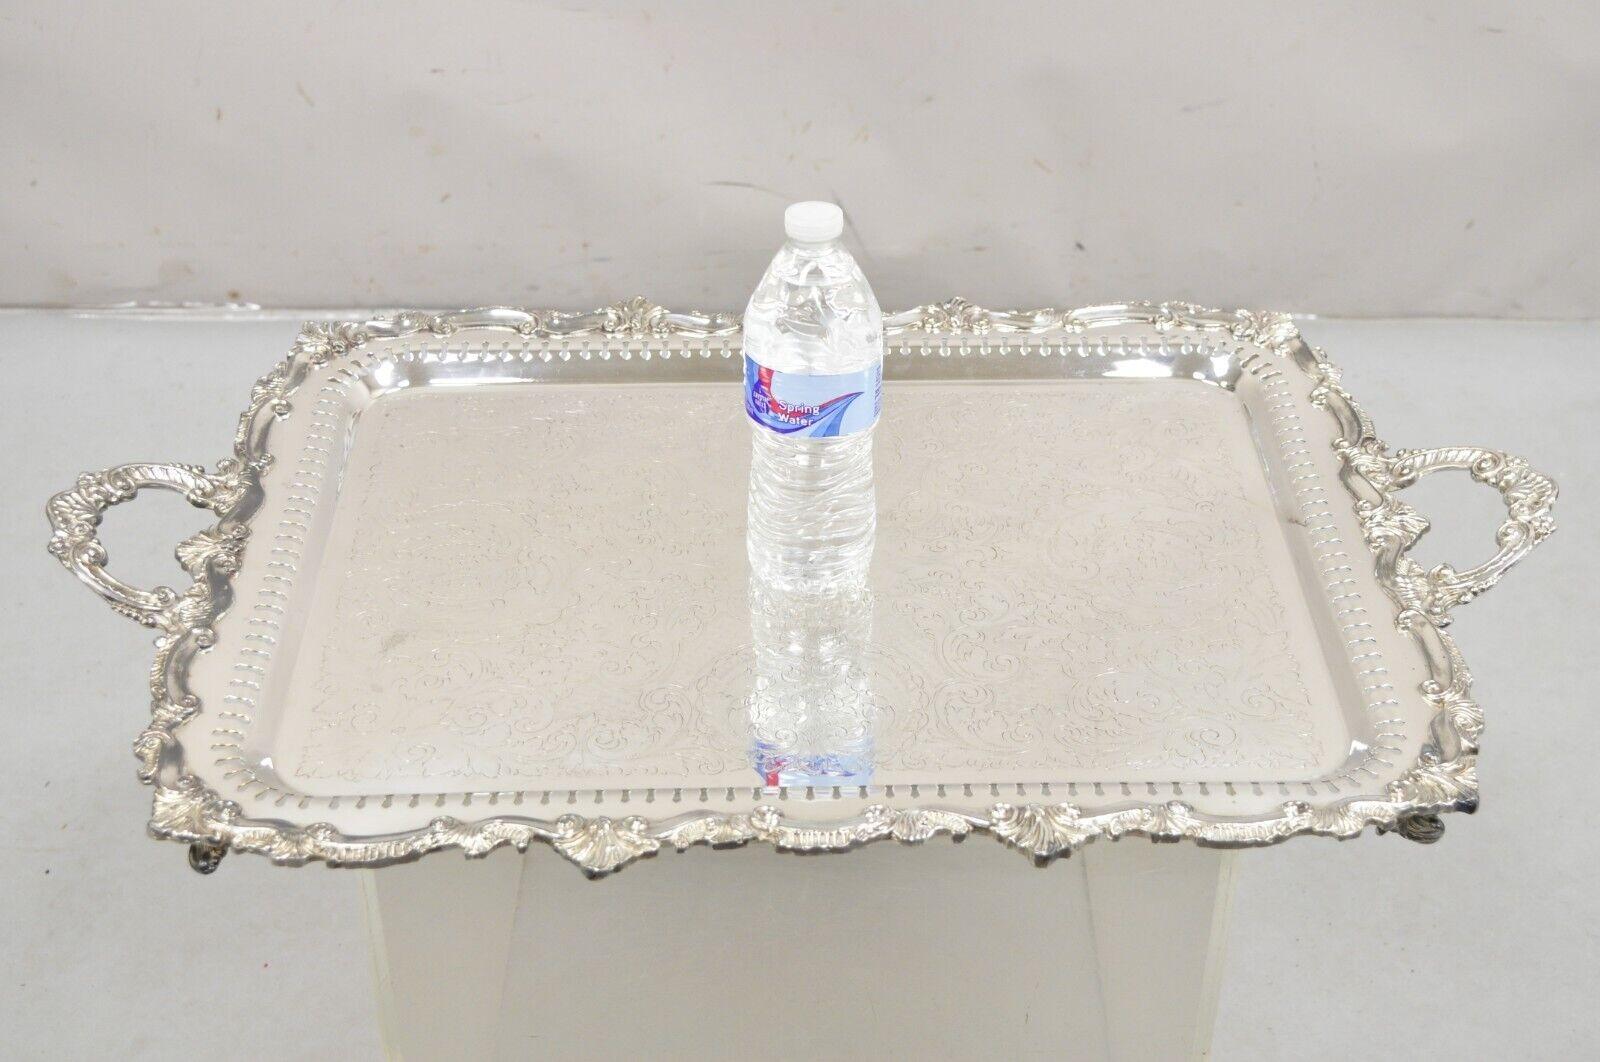 Vintage English Victorian Large Silver Plated Pierced Gallery Serving Platter Tray.  Circa Mid 20th Century. Measurements: 2